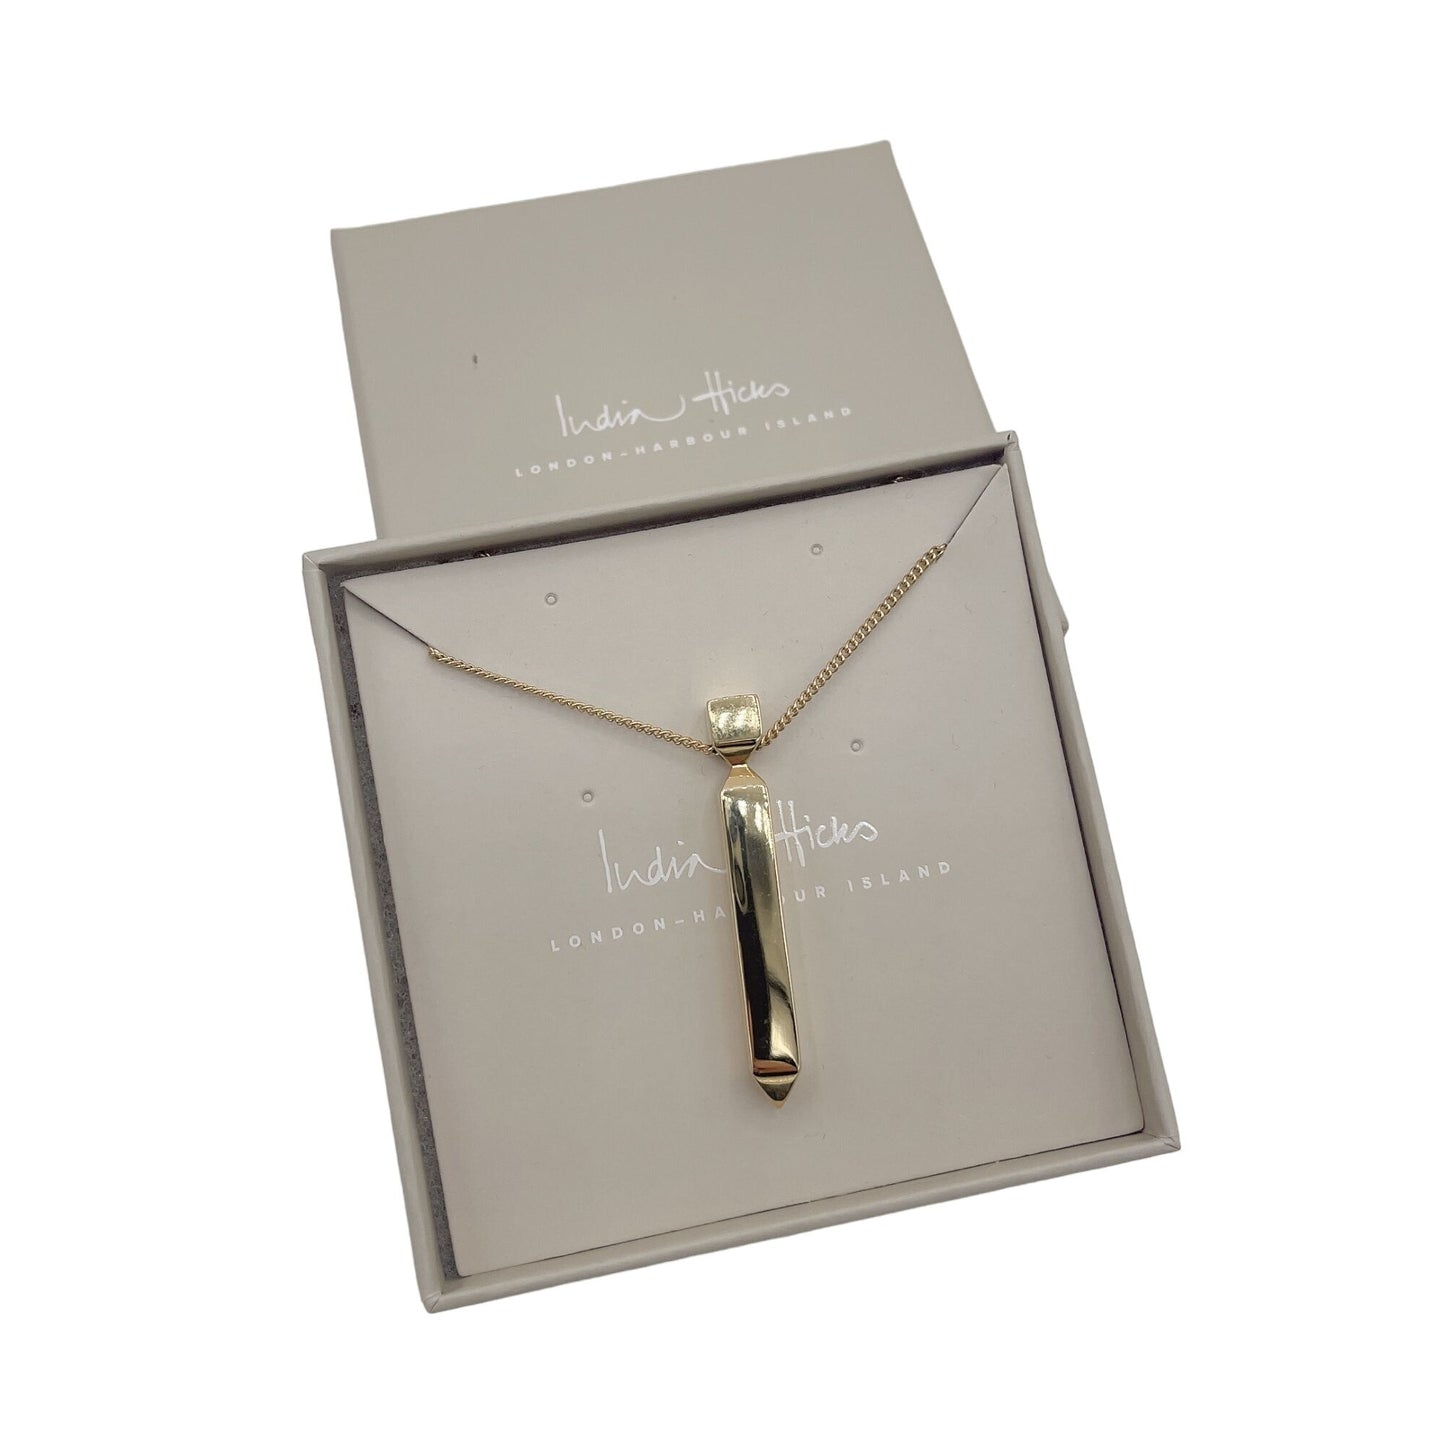 India Hicks Gold Plated Pendant Legacy Necklace